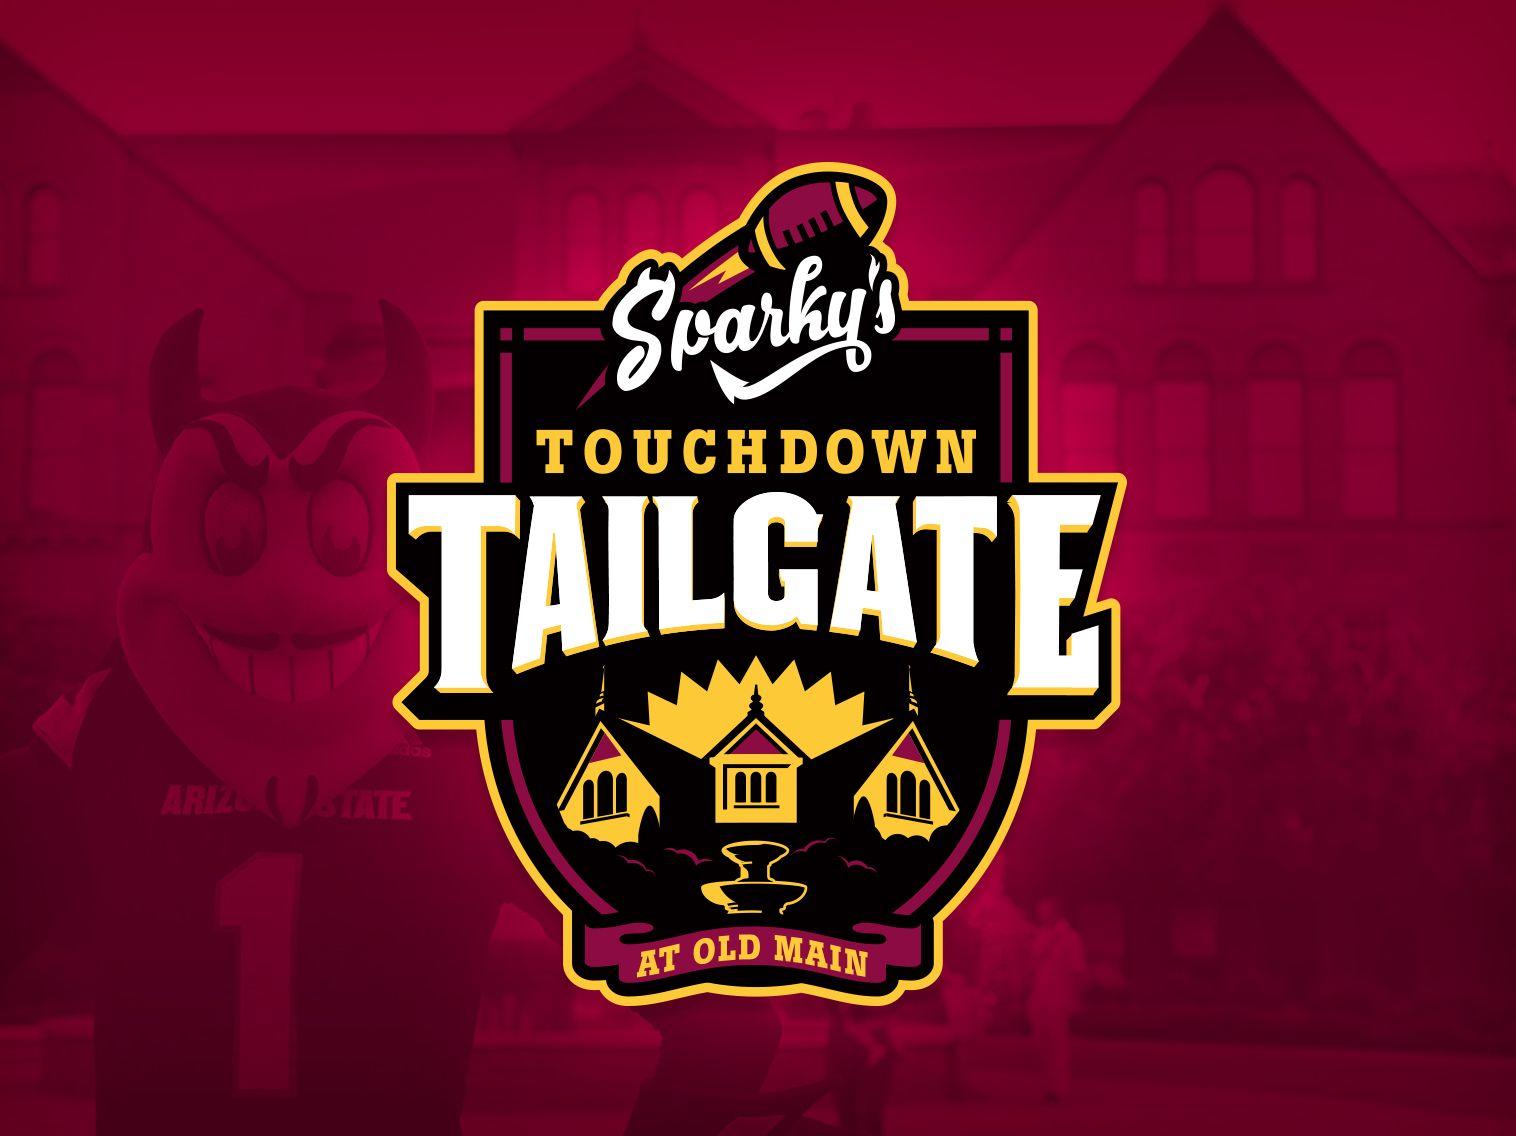 Asu Old Logo - Sparky's Touchdown Tailgate at Old Main by Boyd Erickson | Dribbble ...